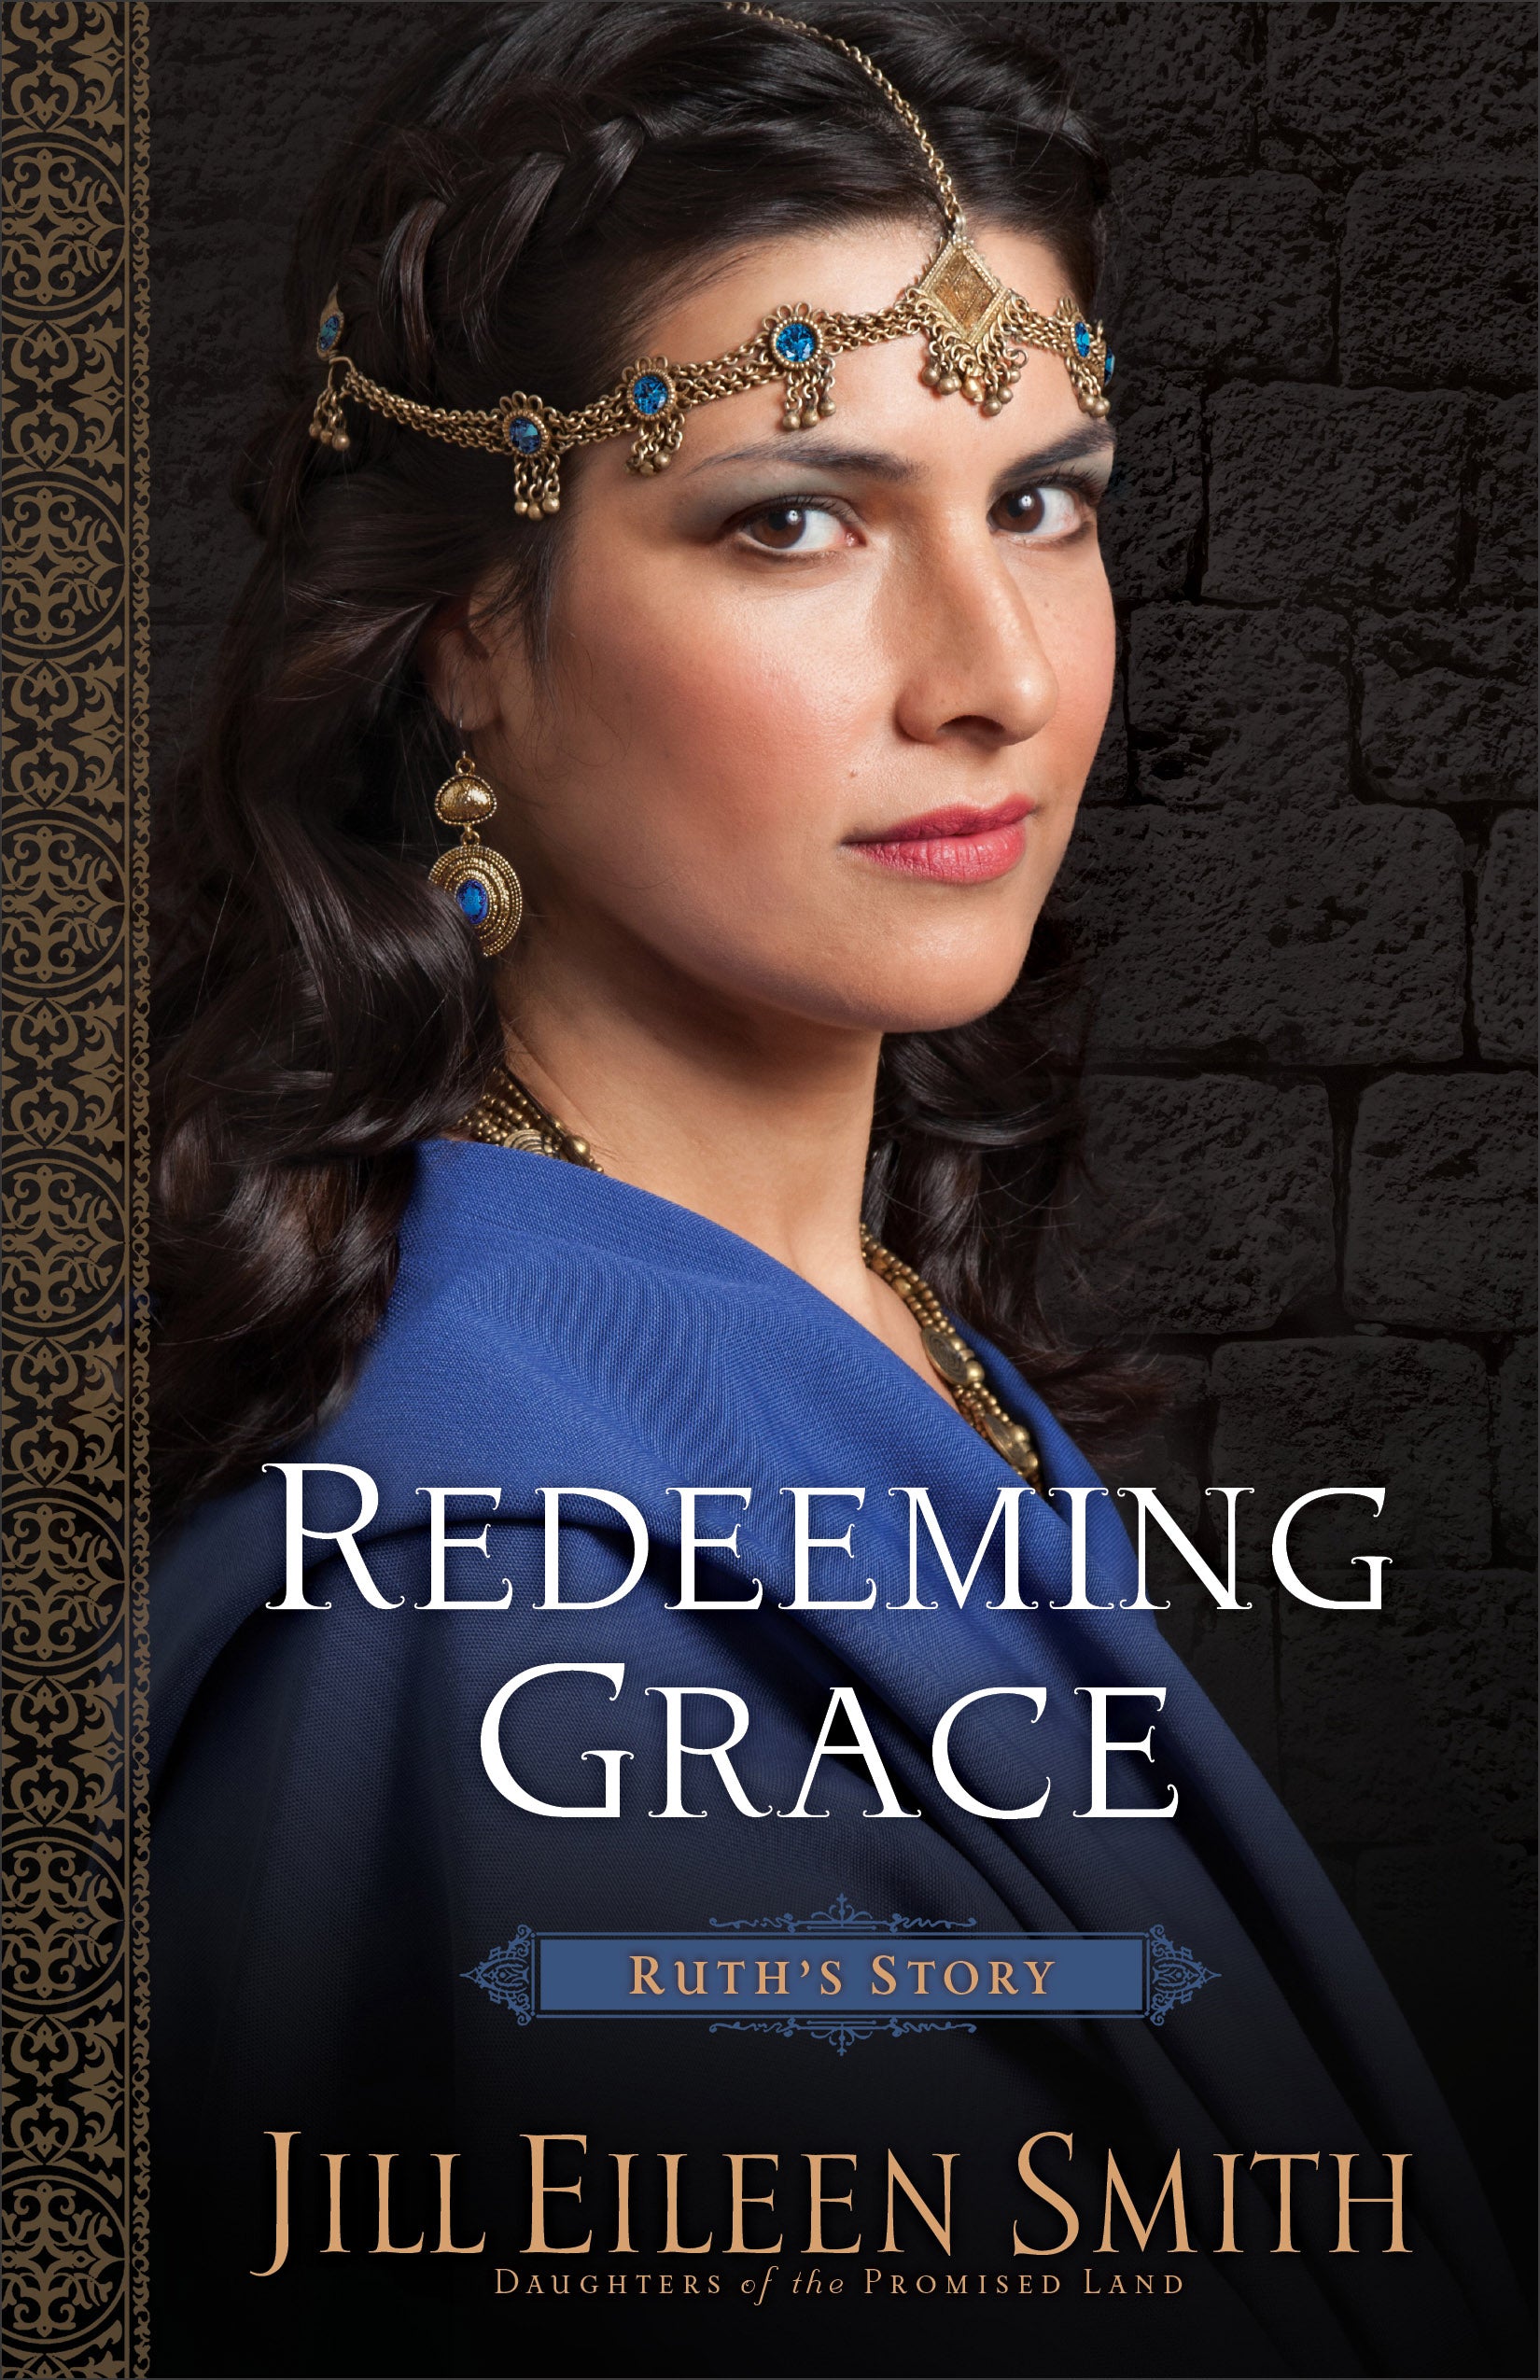 Image of Redeeming Grace other